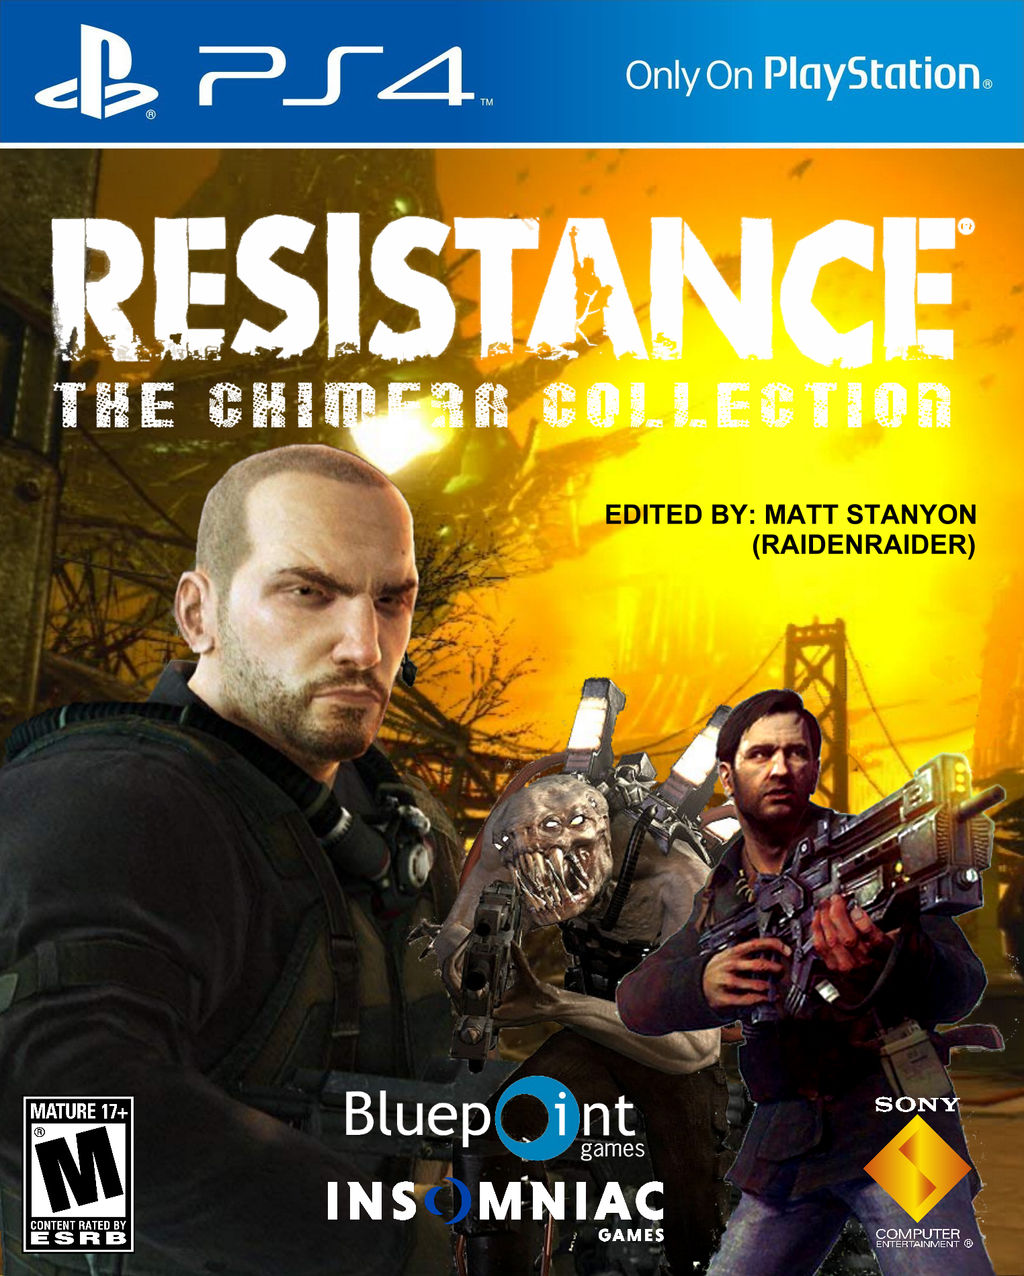 Resistance: The Collection - PS4 Cover by RaidenRaider on DeviantArt